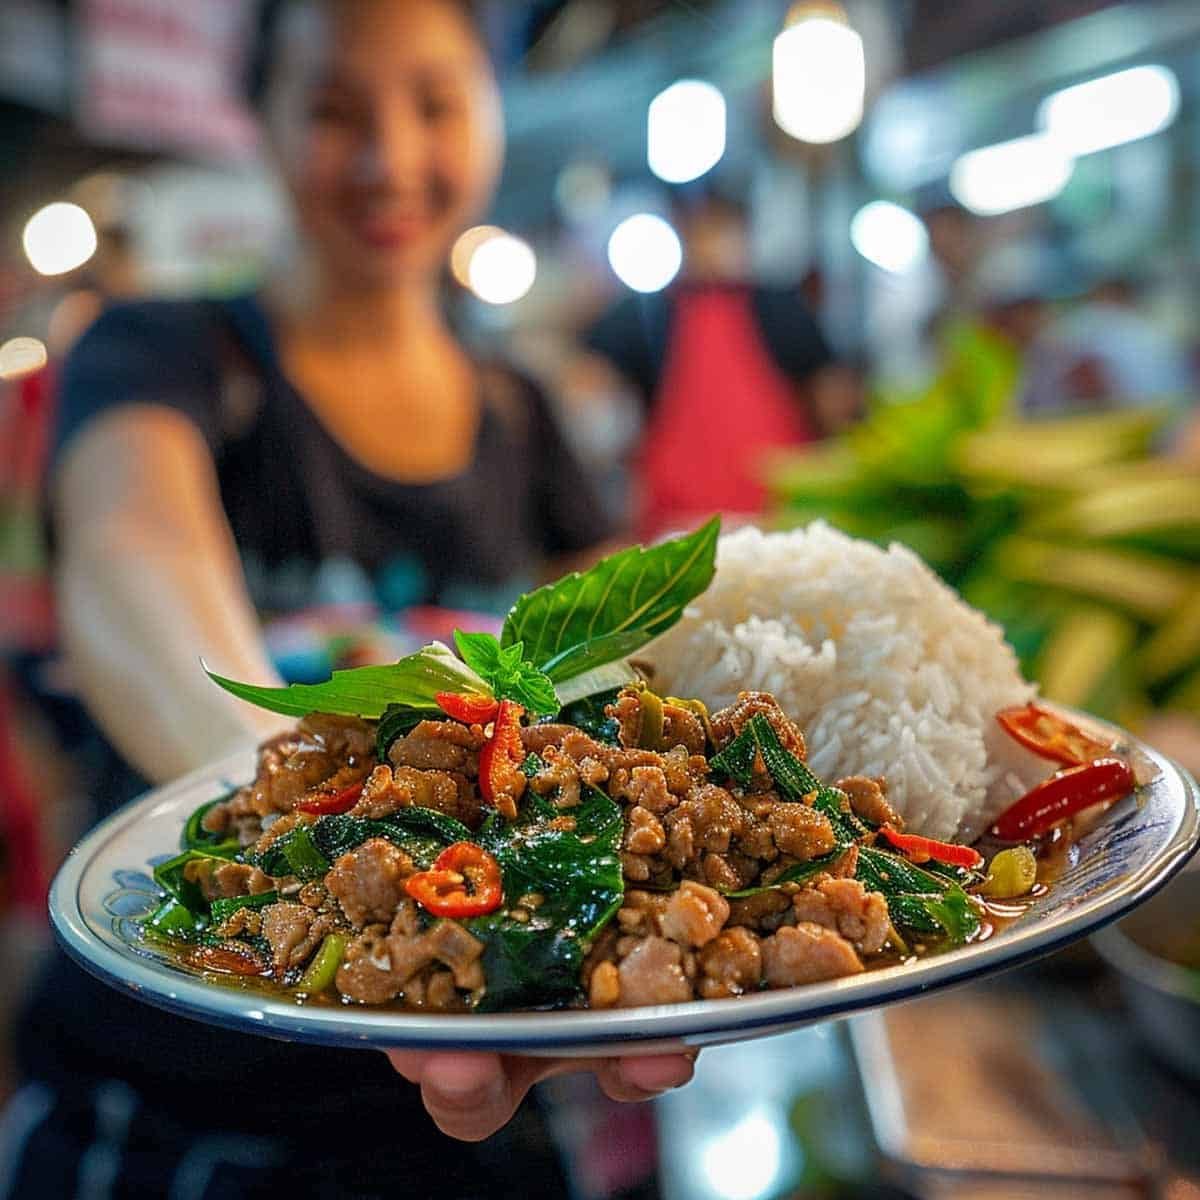 Plate of Thai Basil Pork (Pad Kra Pao Moo) garnished with basil leaves, served with a side of rice.